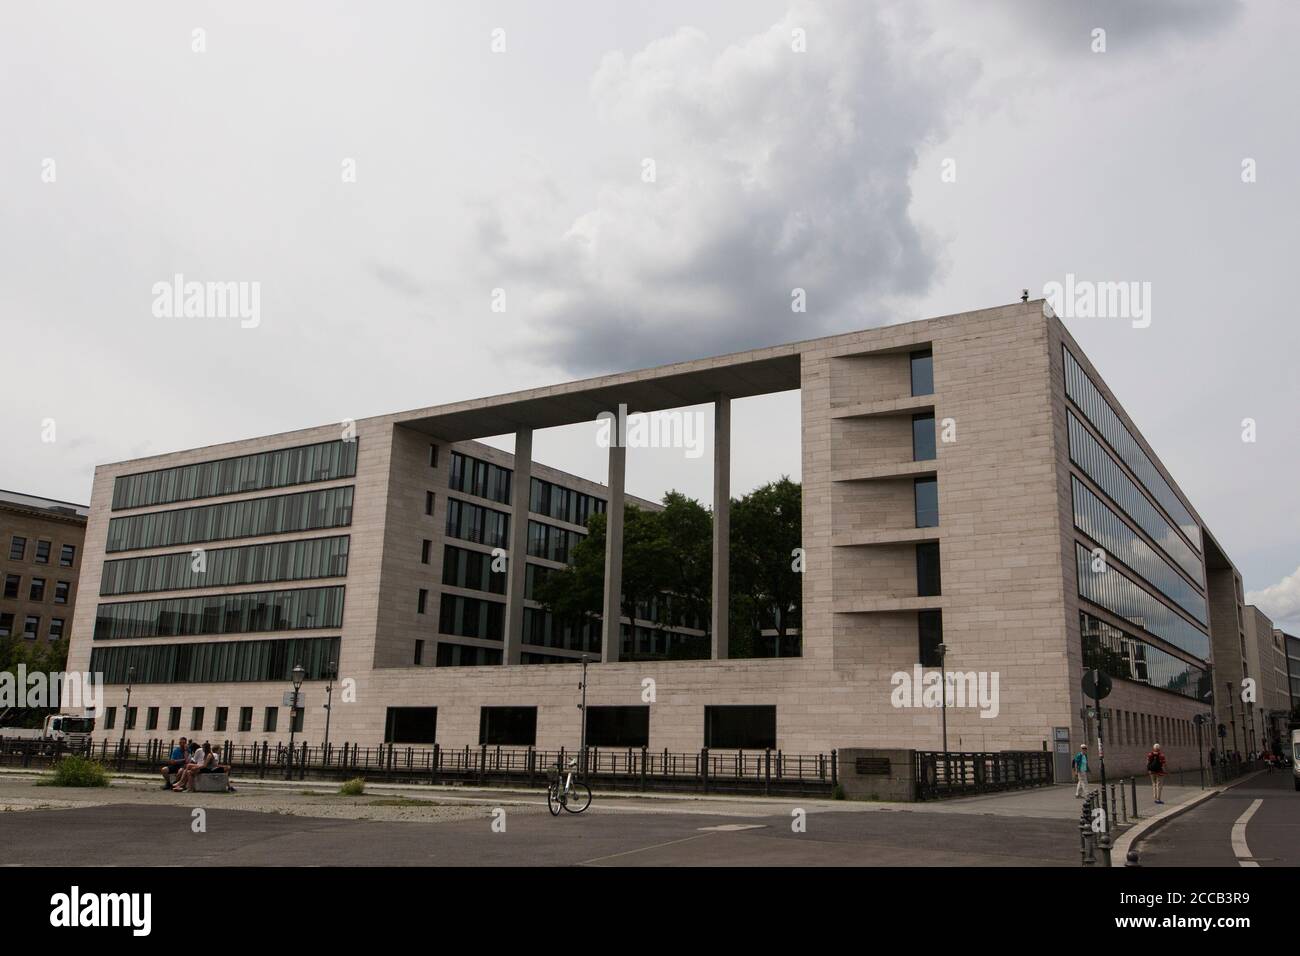 The Foreign Office of the Federal Republic of Germany on Werderscher Markt in Berlin, Germany. Stock Photo